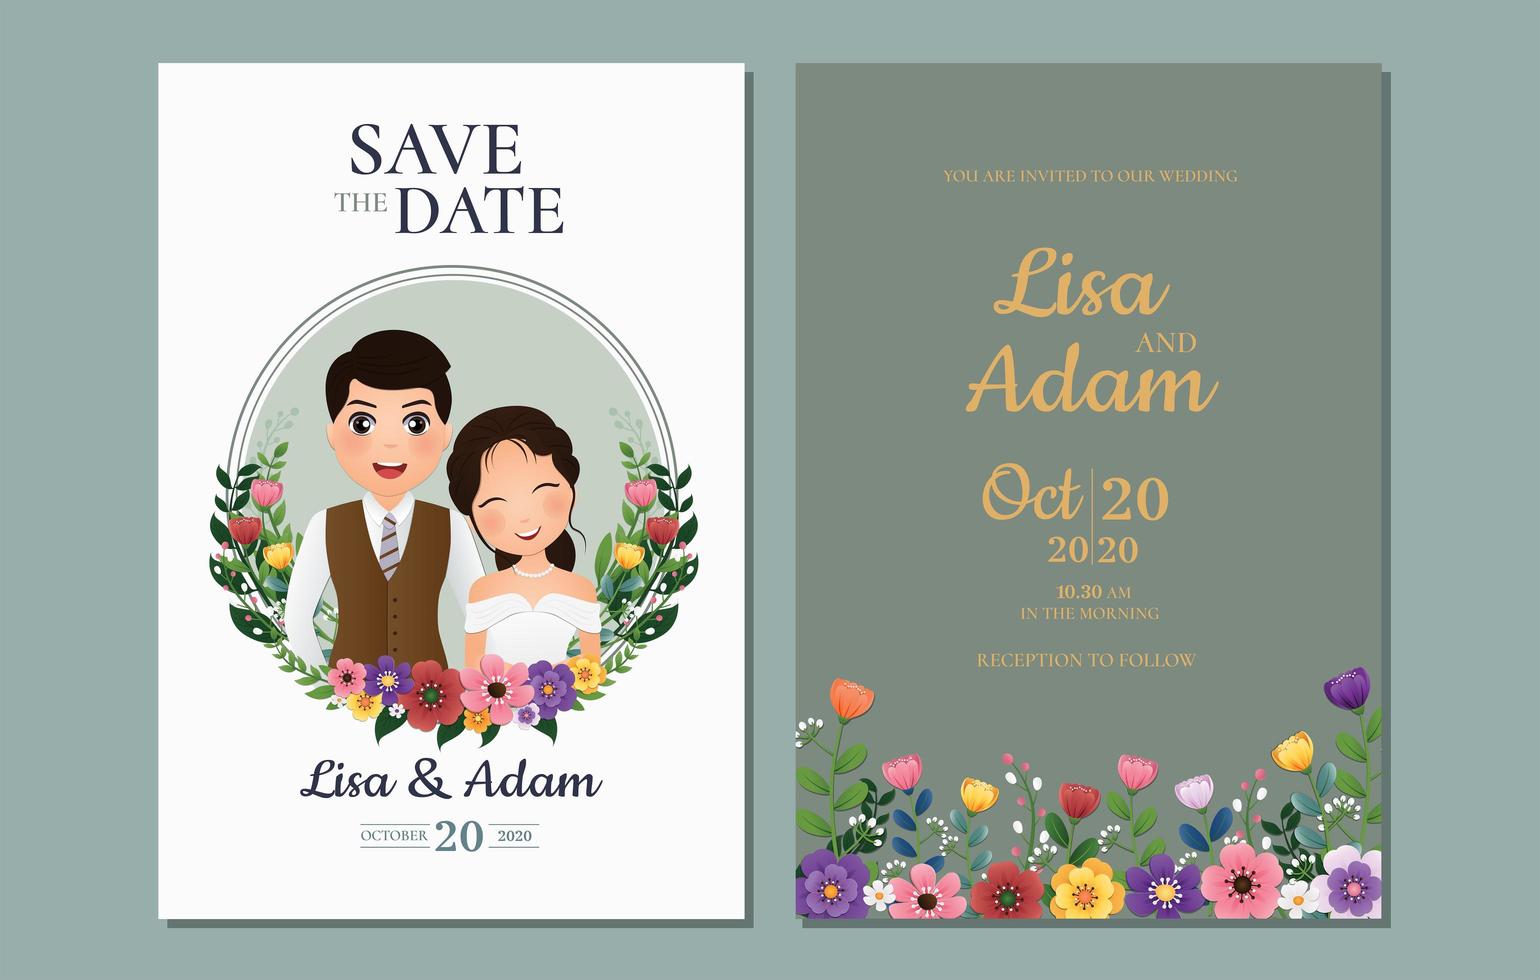 Save the Date with Bride and Groom in Circle Frame vector